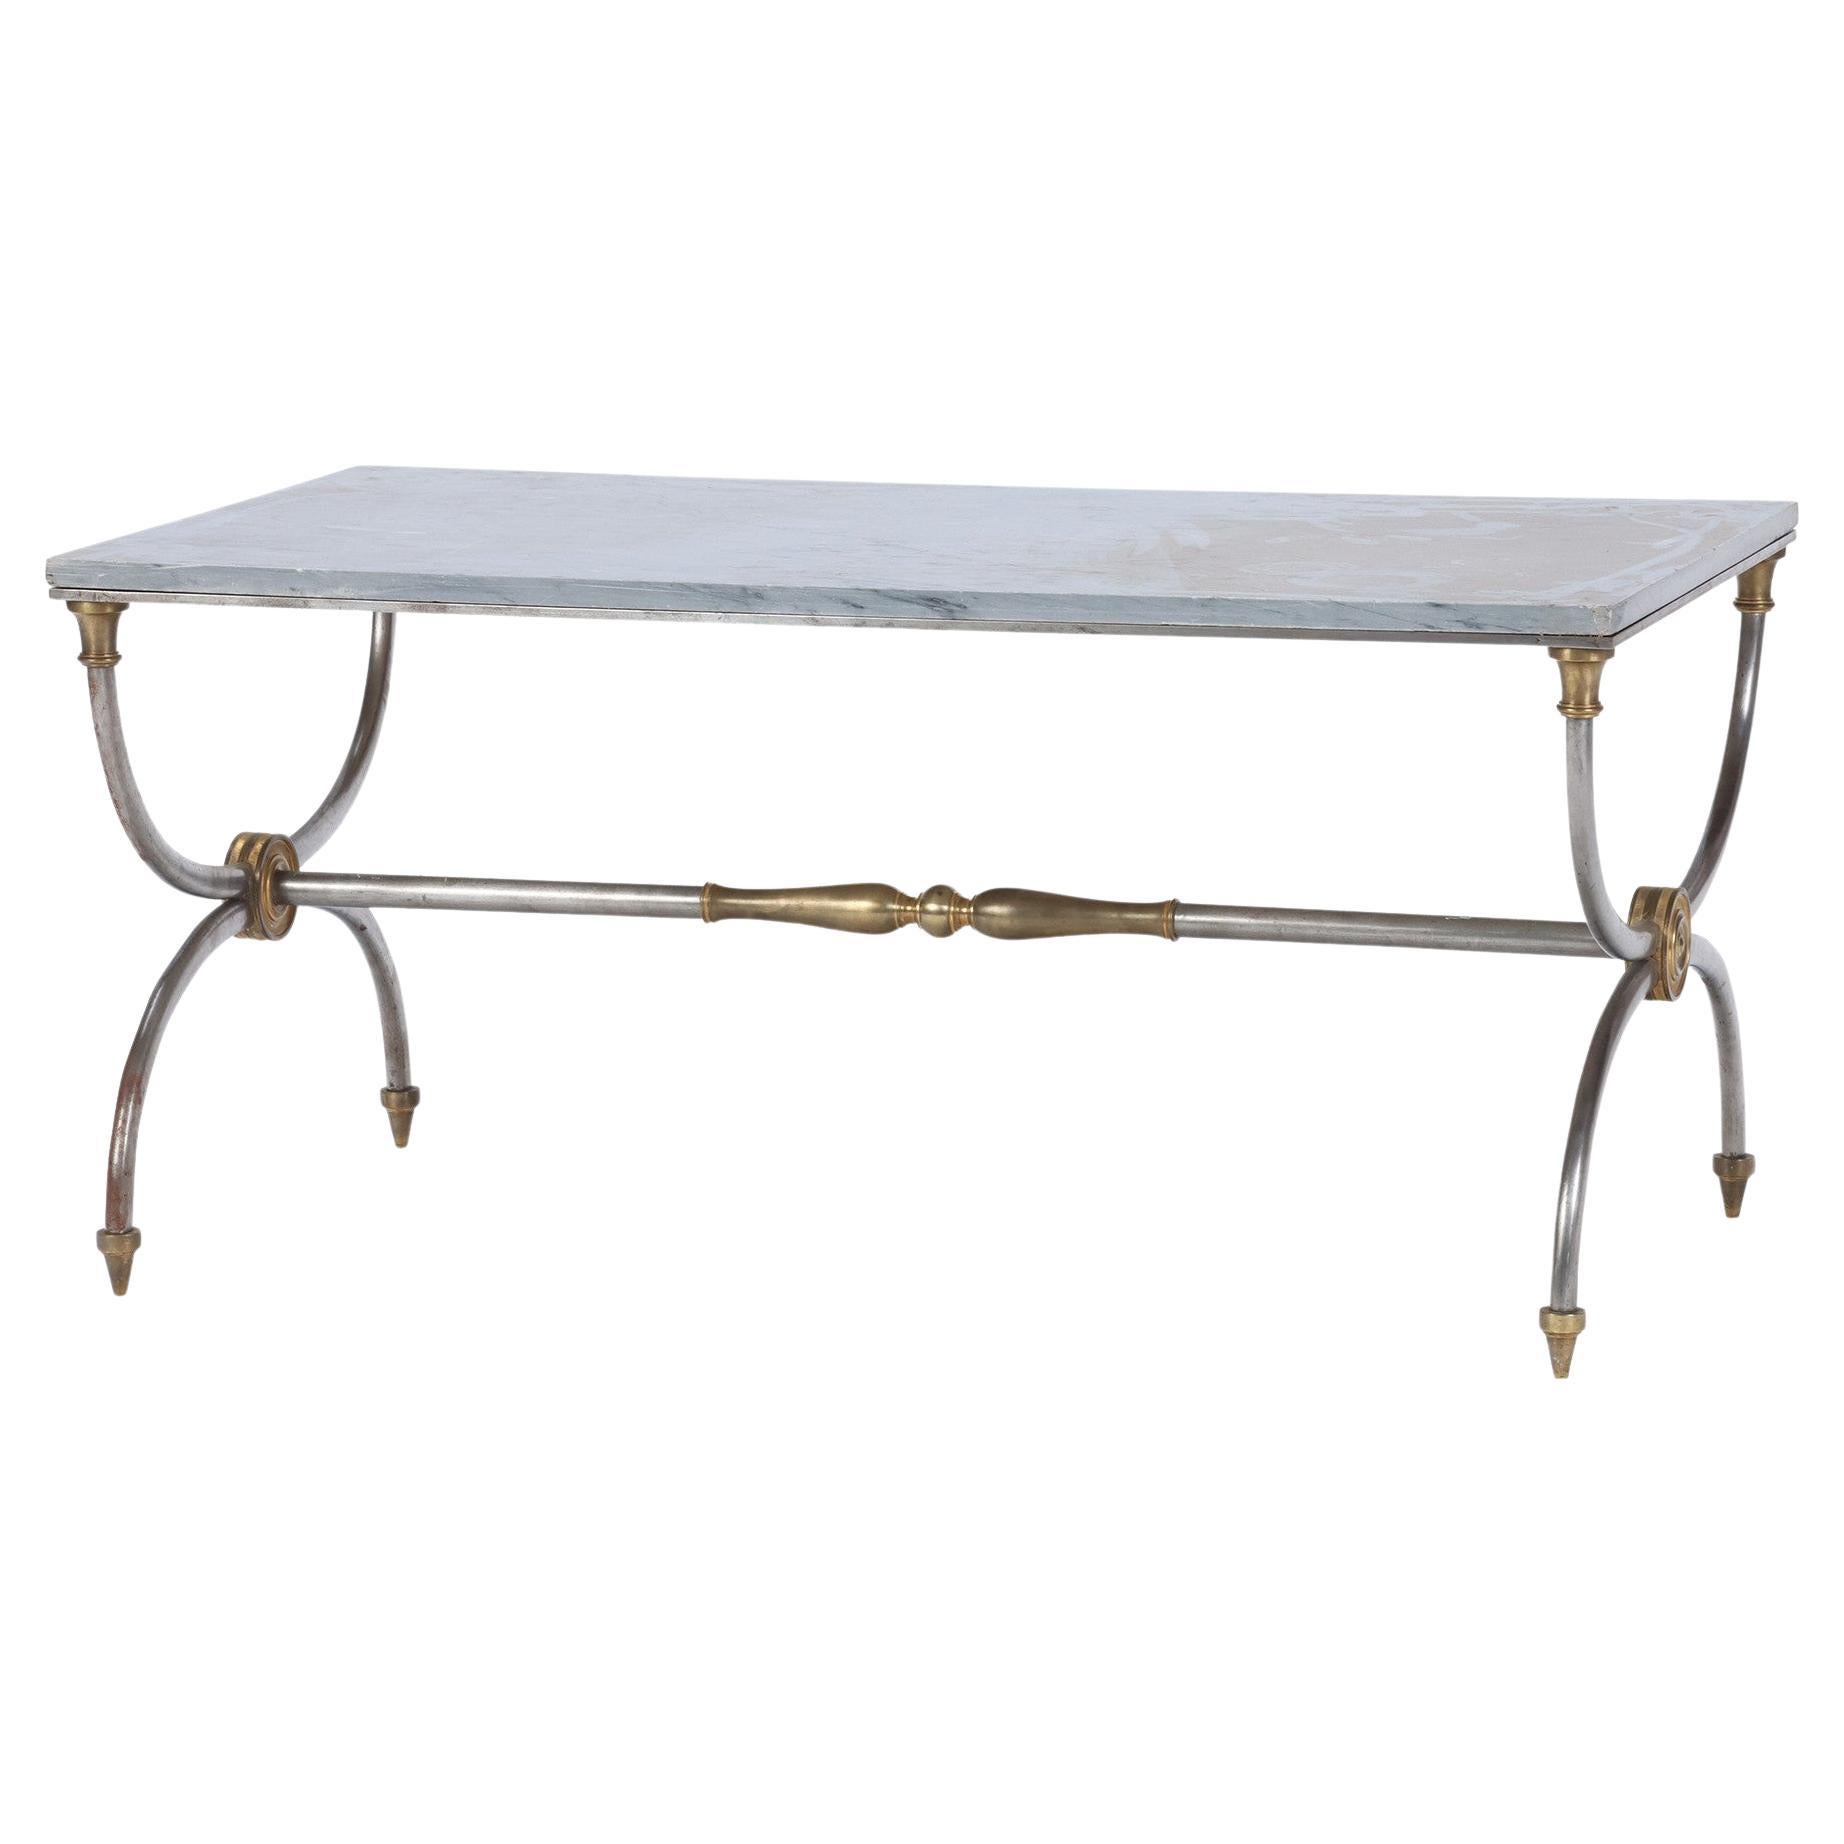 Two-Tone Bronze and Steel Coffee Table with Marble Top, Jansen C 1950